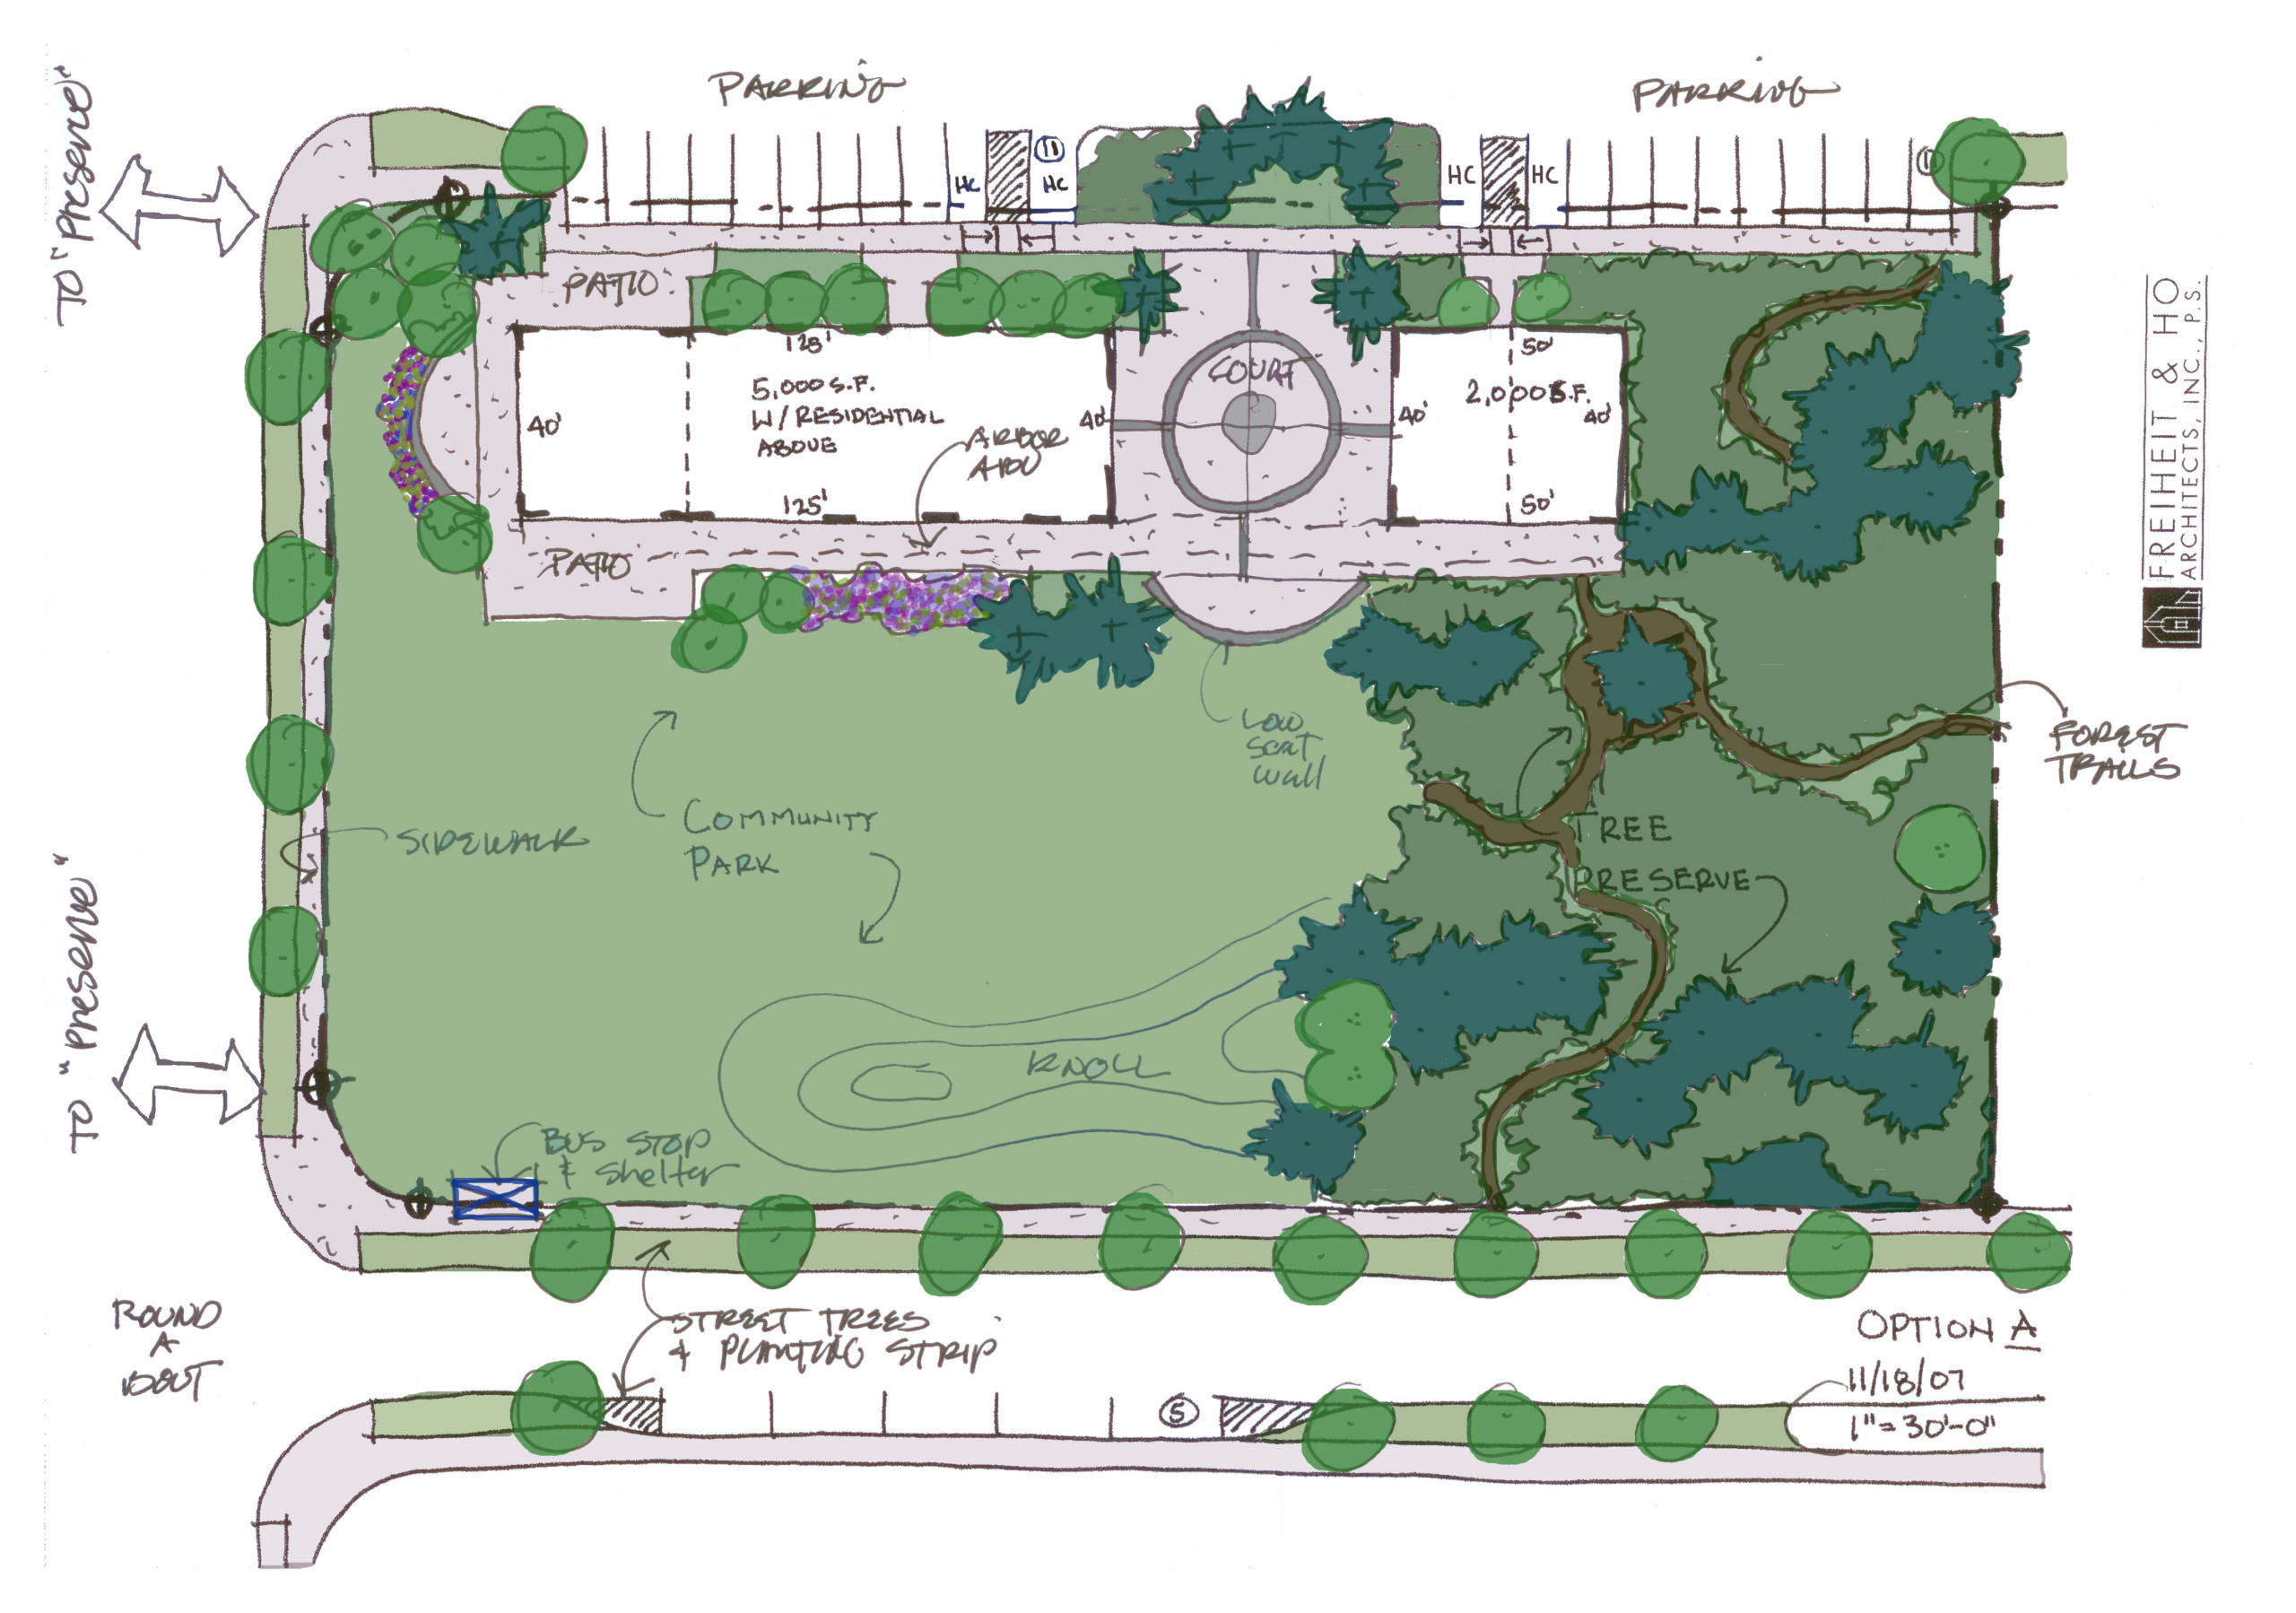 Conceptual plan of main park and recreation area